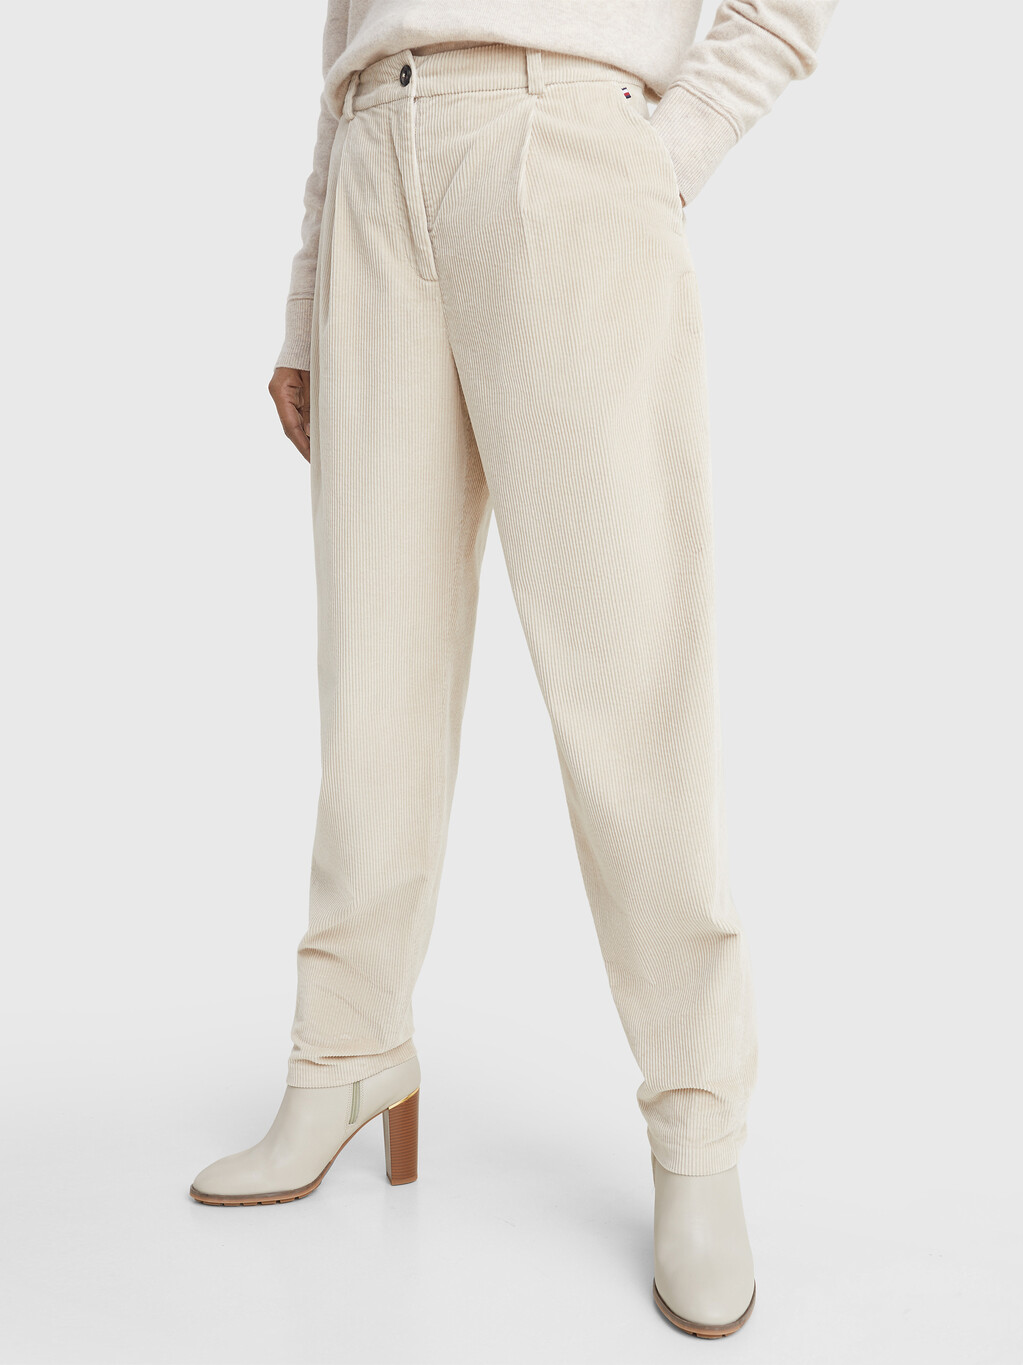 Tapered Corduroy Trousers, White Clay, hi-res